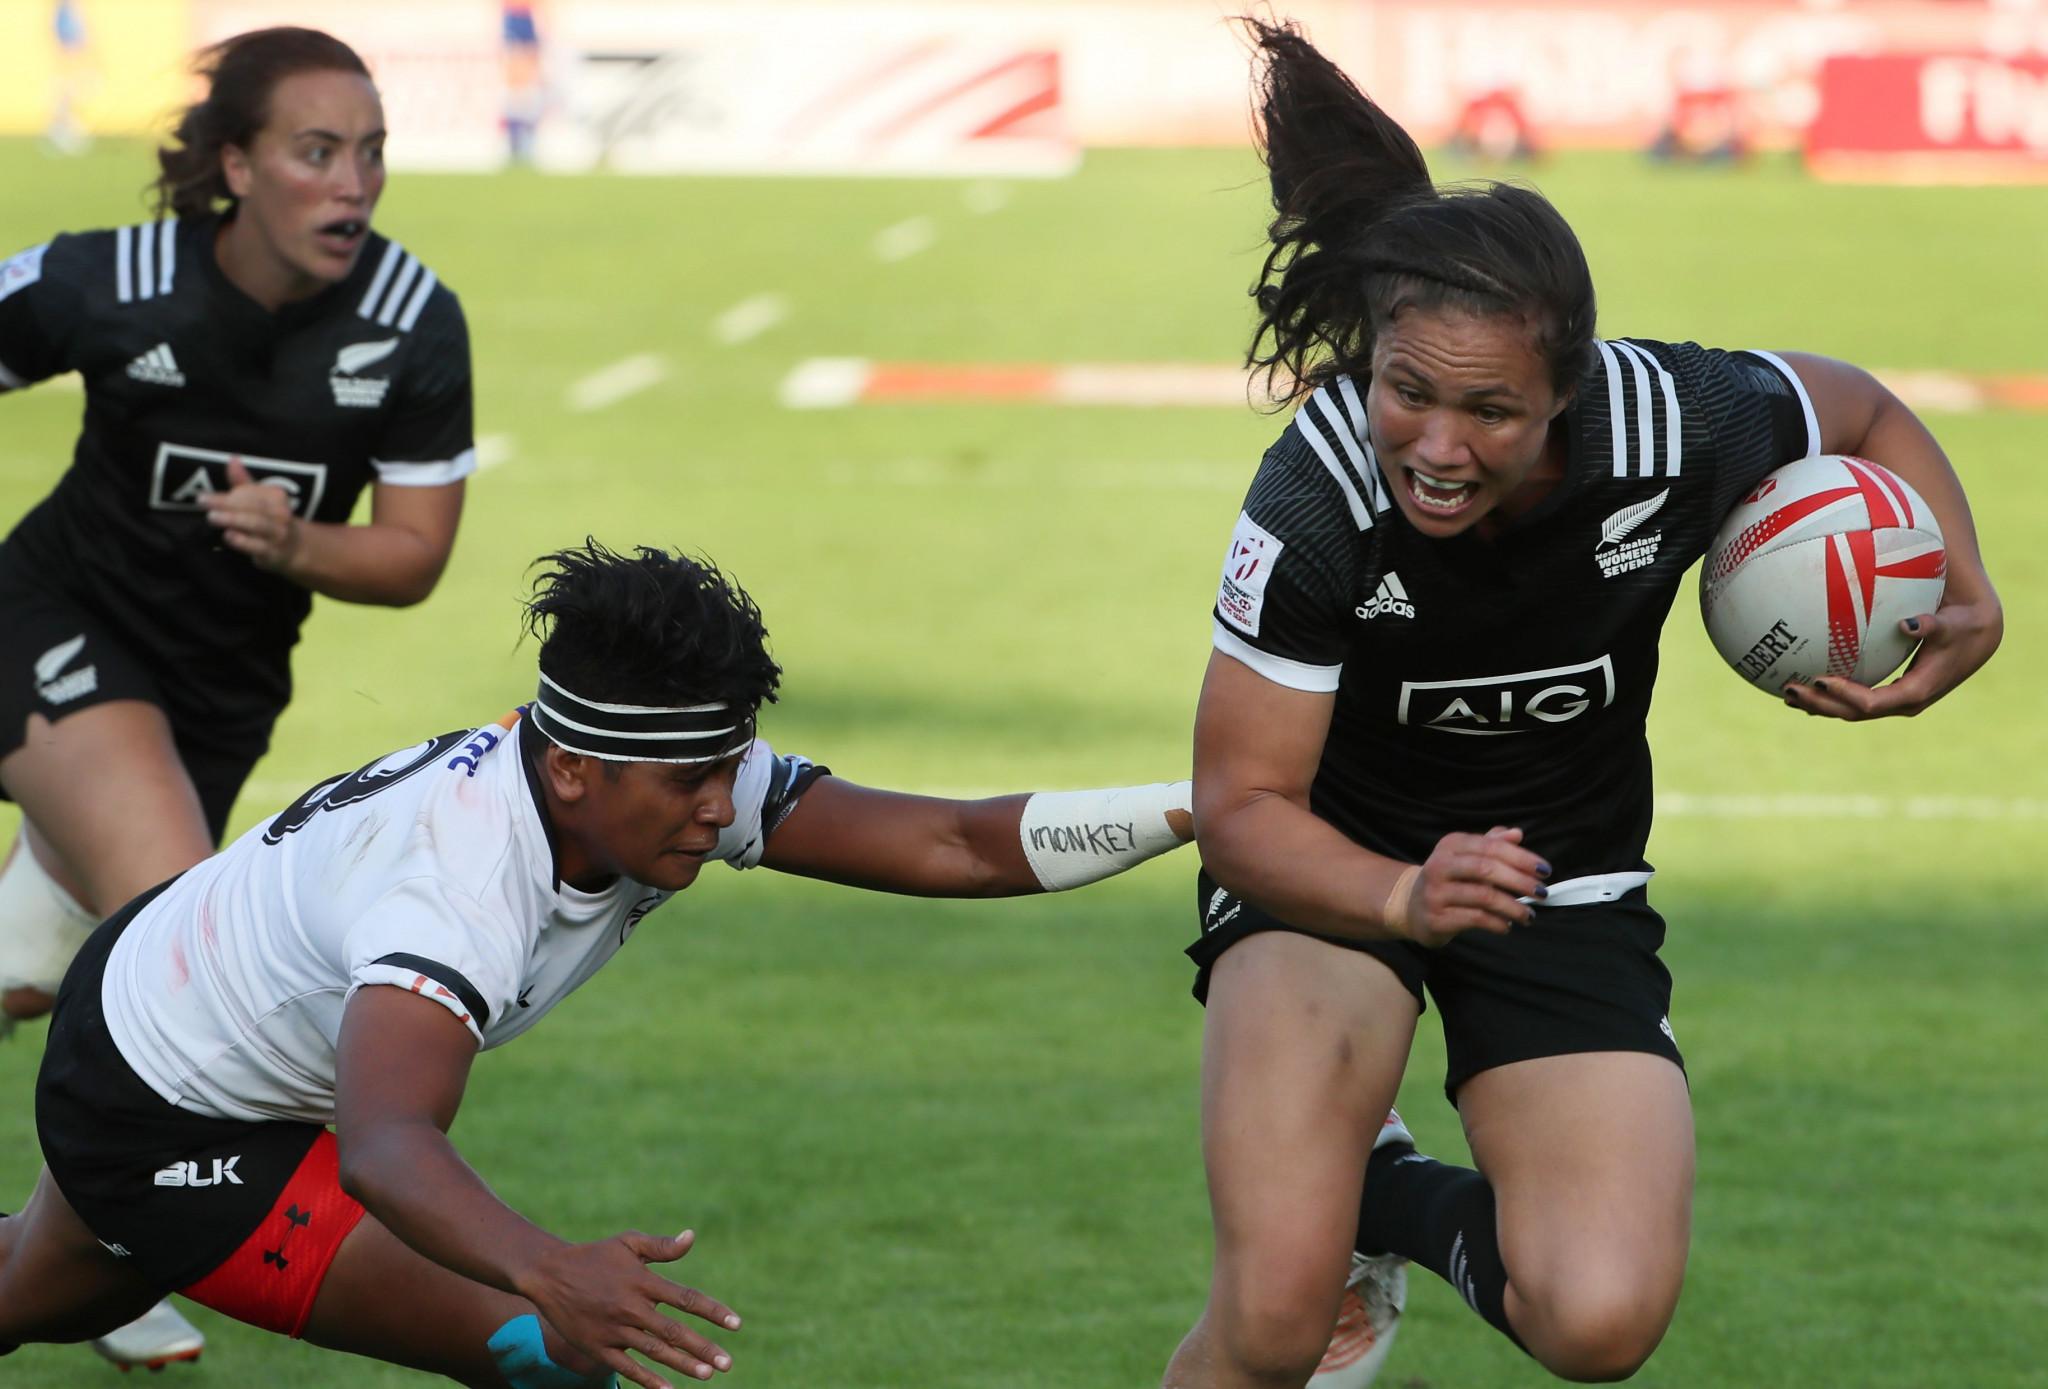 New Zealand delay arrival of women's rugby sevens squad after player contracts mumps